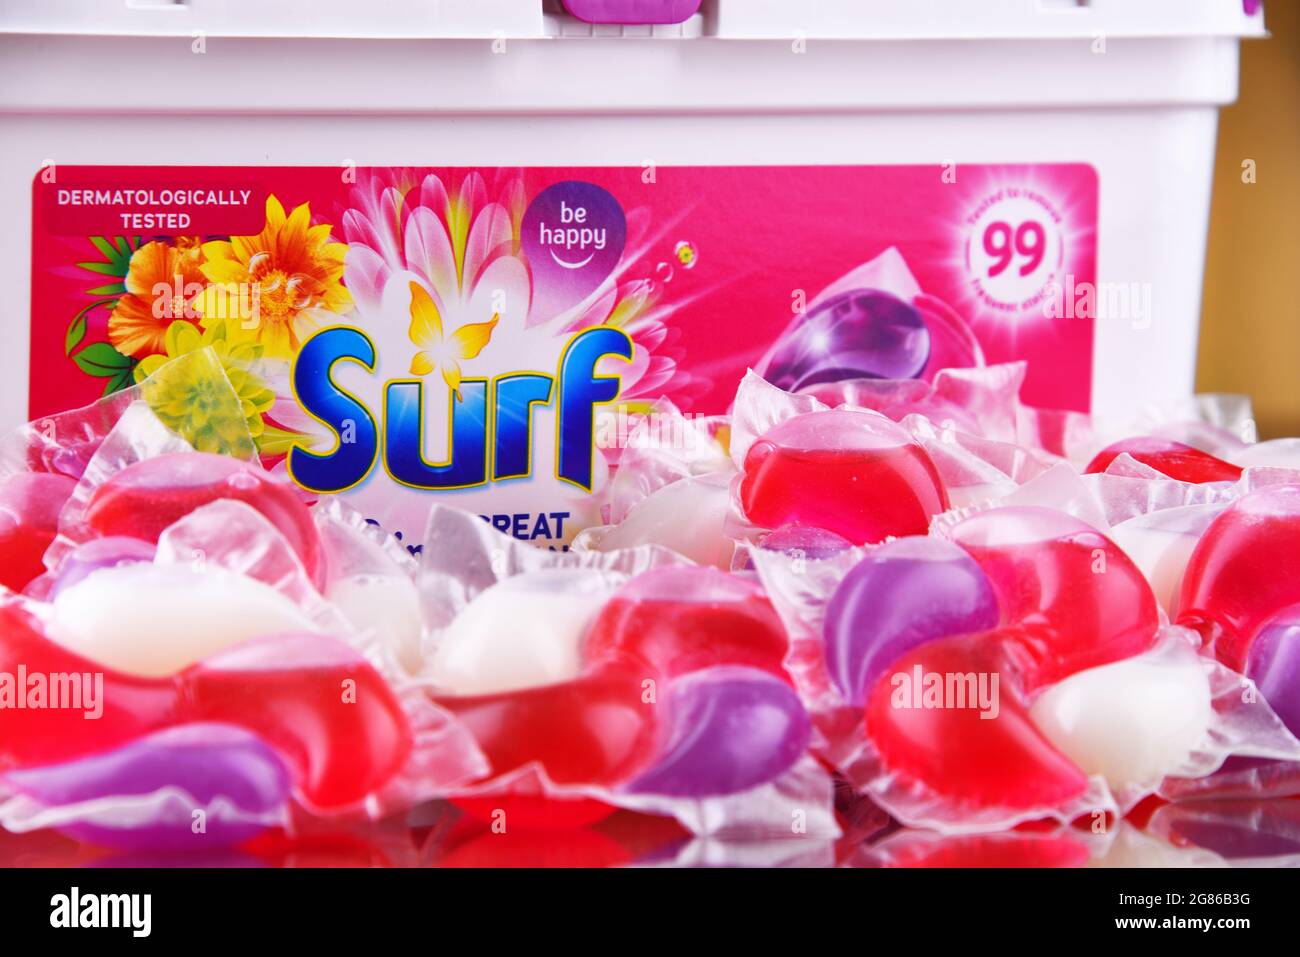 POZNAN, POL - JUN 10, 2021: A box of Surf capsule laundry detergent product, manufactured and marketed by Unilever Stock Photo